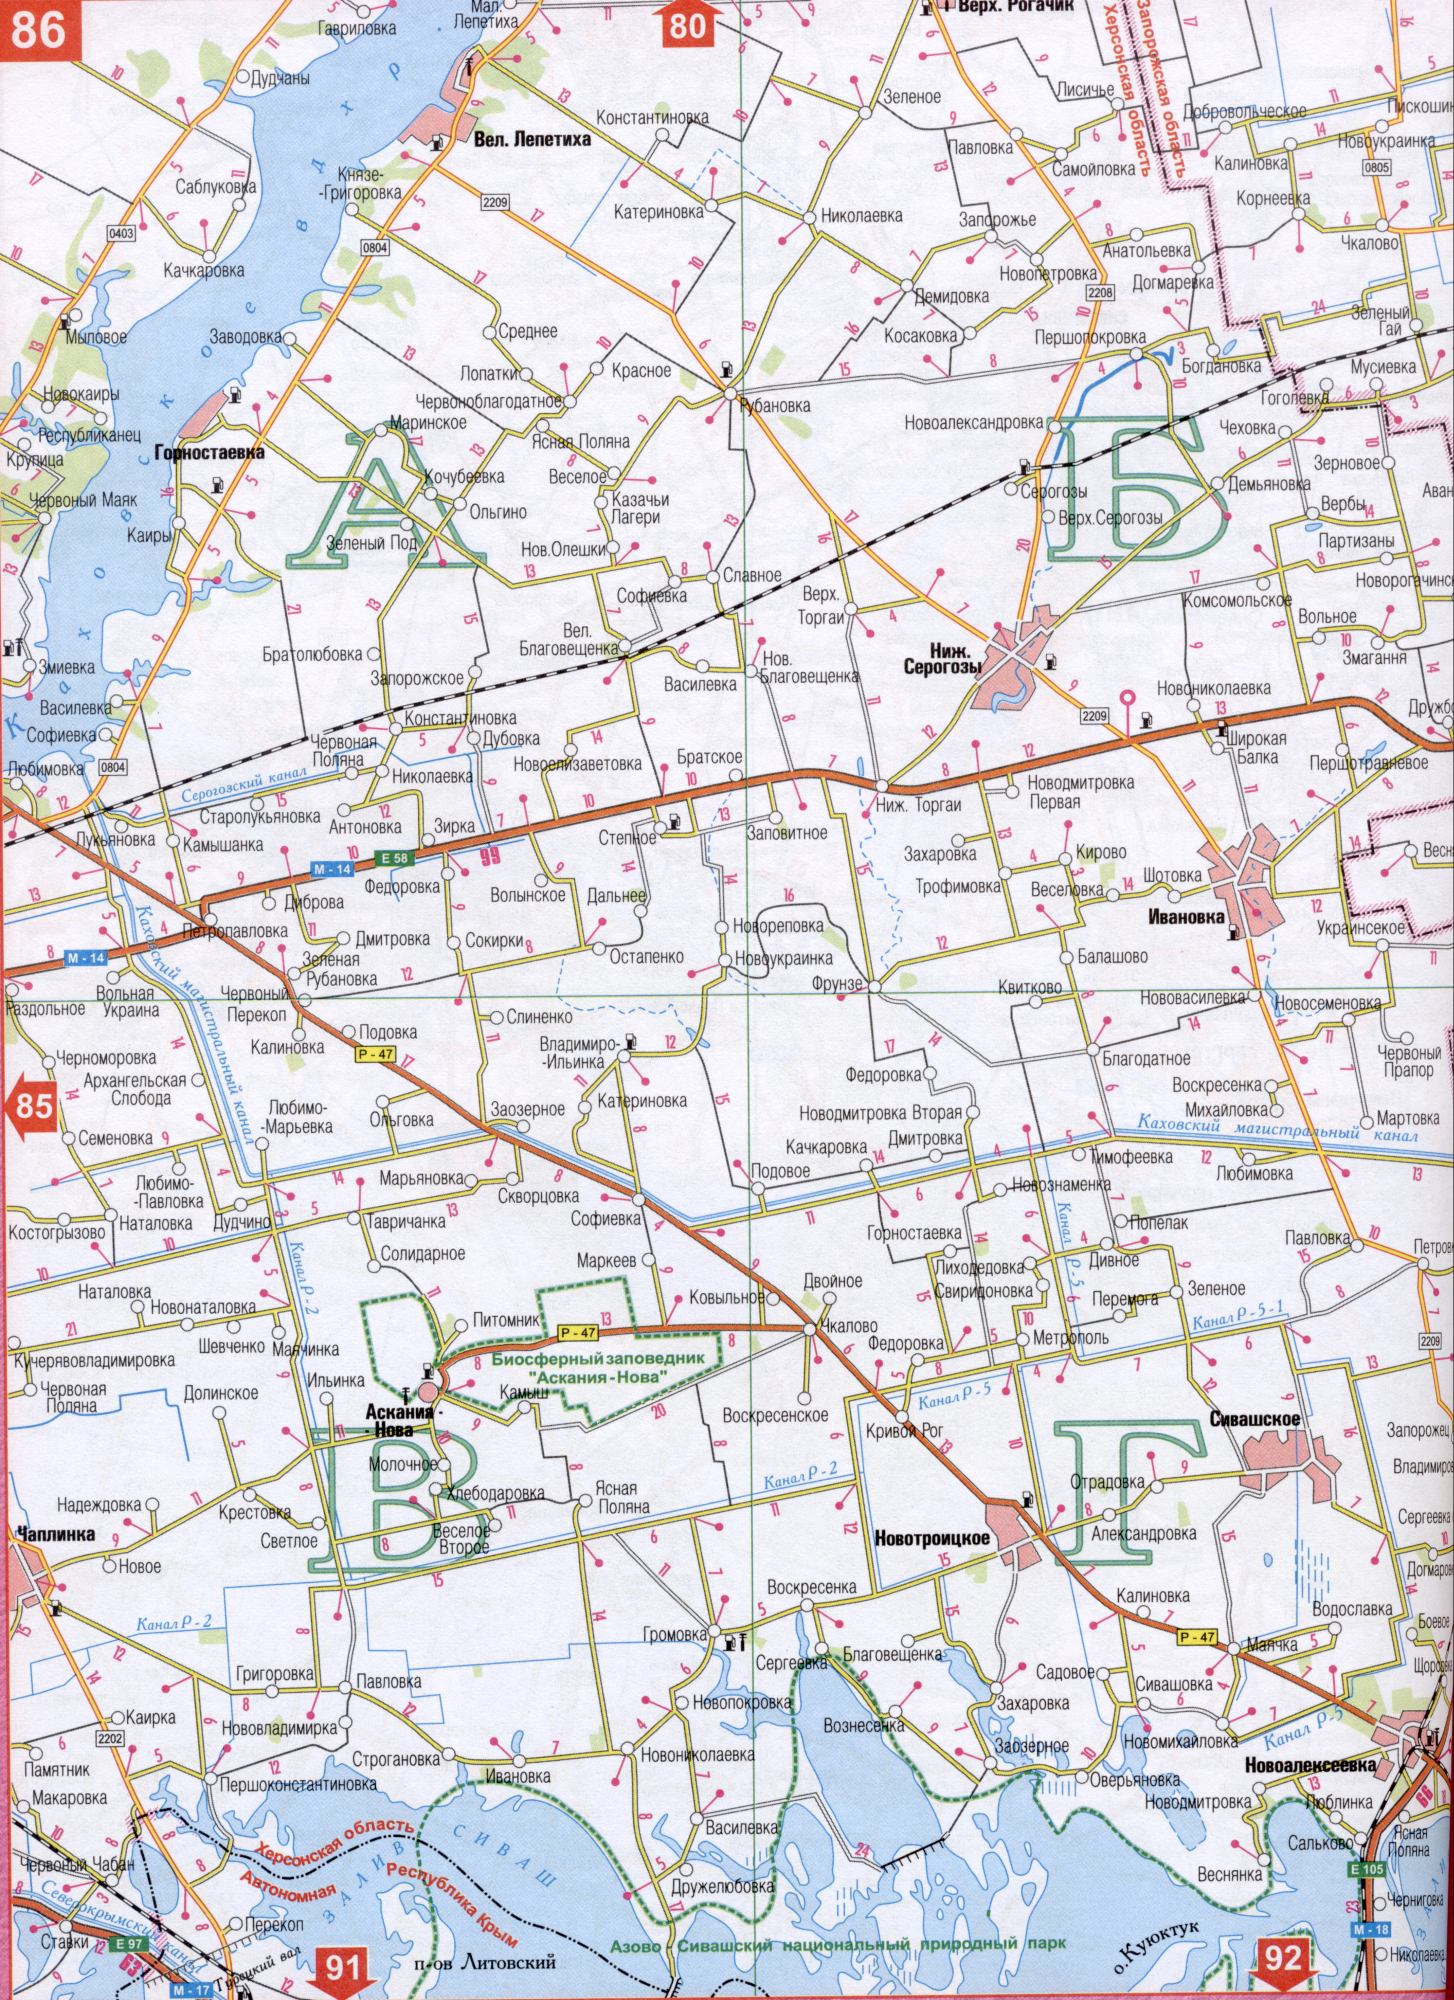 Map of Kherson region of Ukraine (regional center of Kherson city). Download a detailed map of highways, B0 - Kakhovka main canal